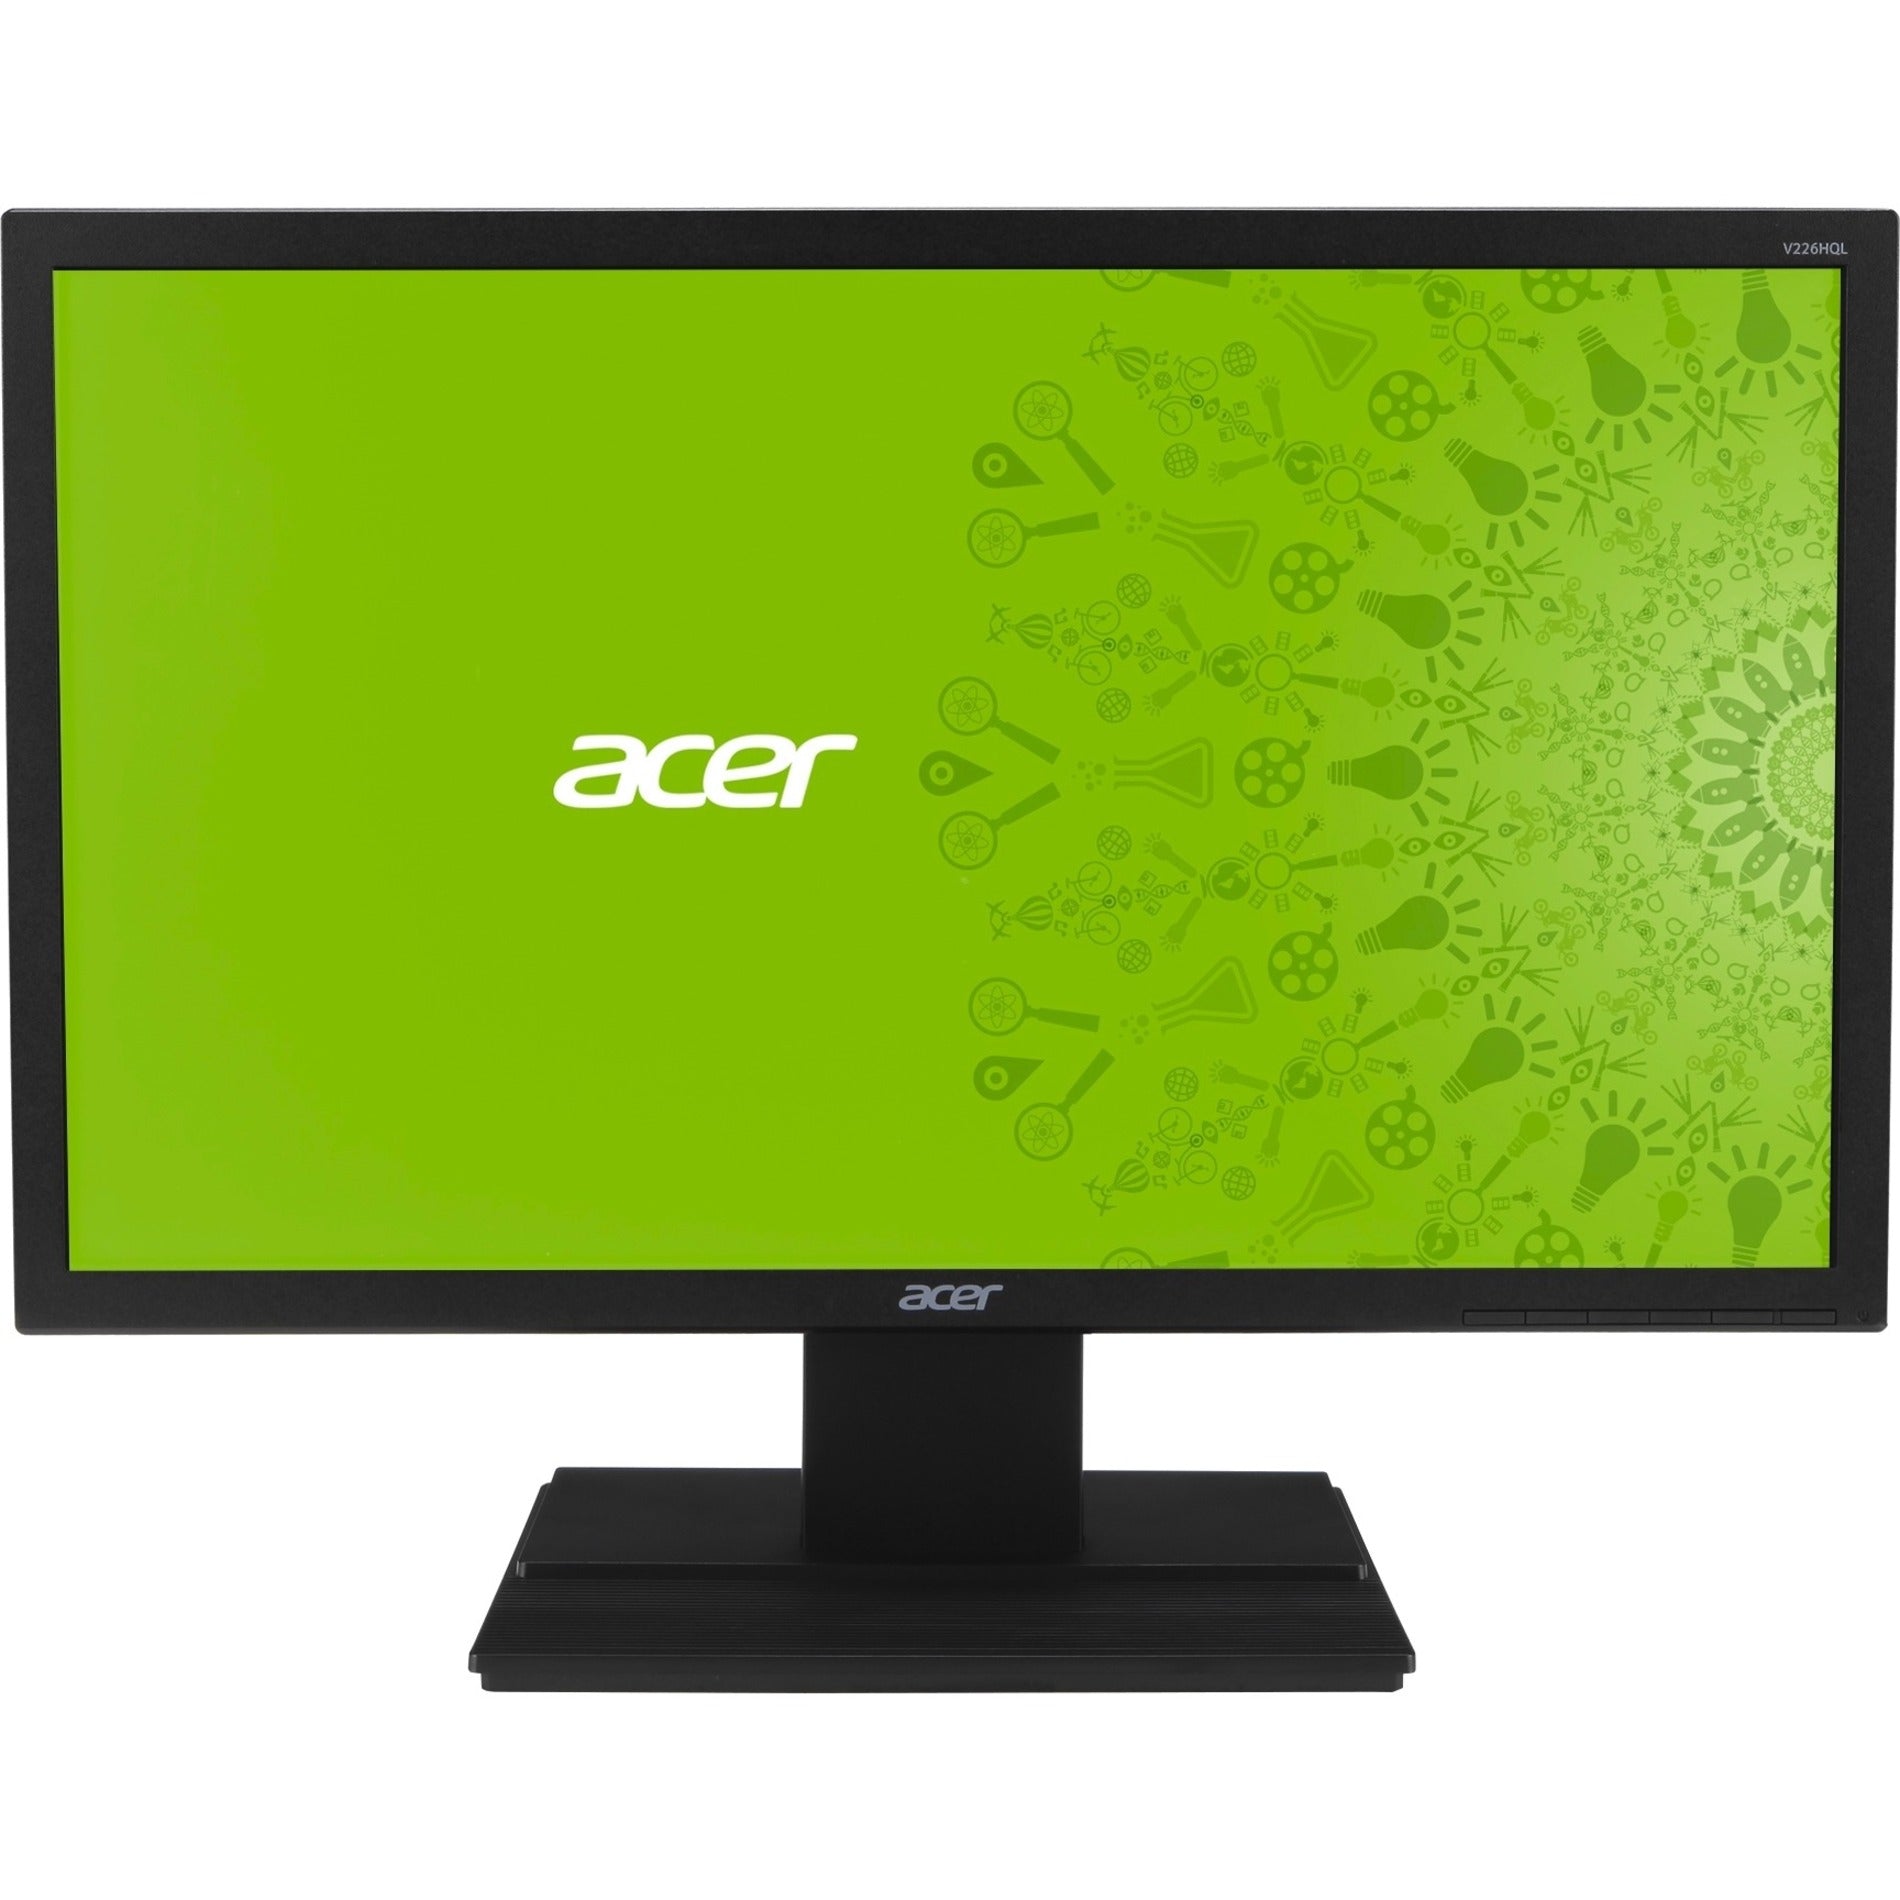 Acer UM.WV6AA.B01 V226HQL Widescreen LCD Monitor, 21.5" Full HD, 5ms Response Time, 100,000,000:1 Contrast Ratio